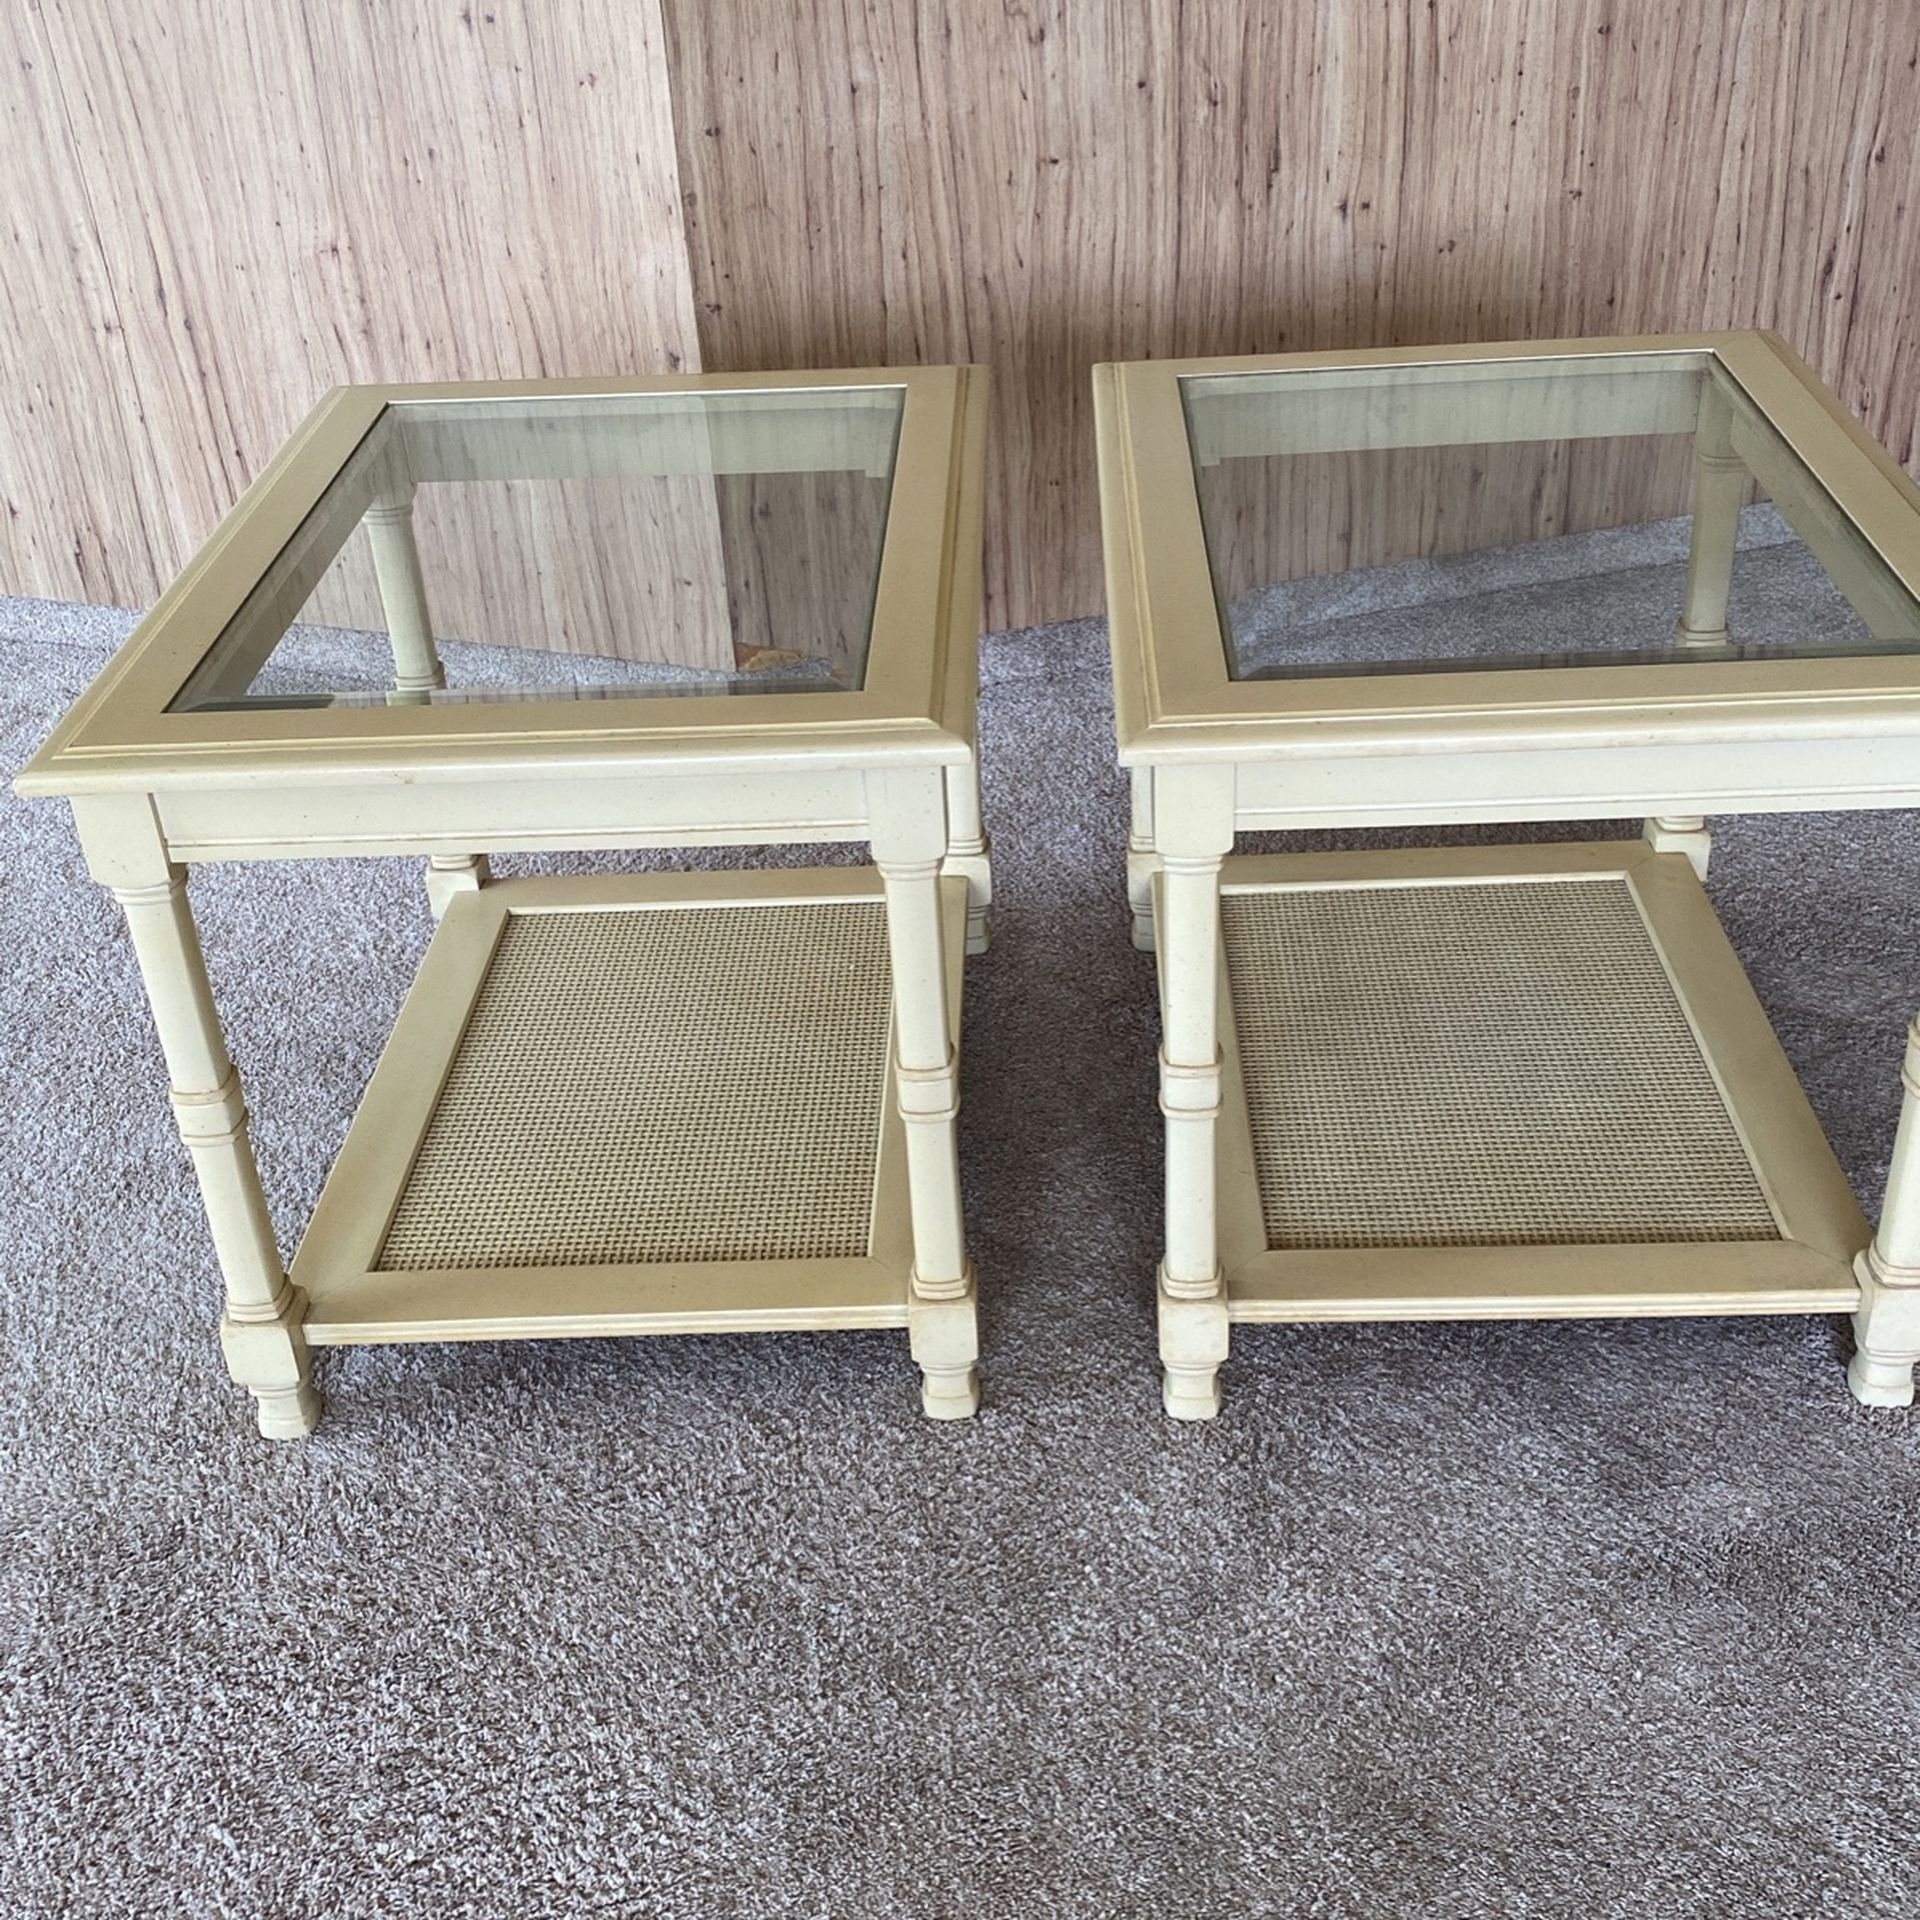 2 End Tables With Glass Tops